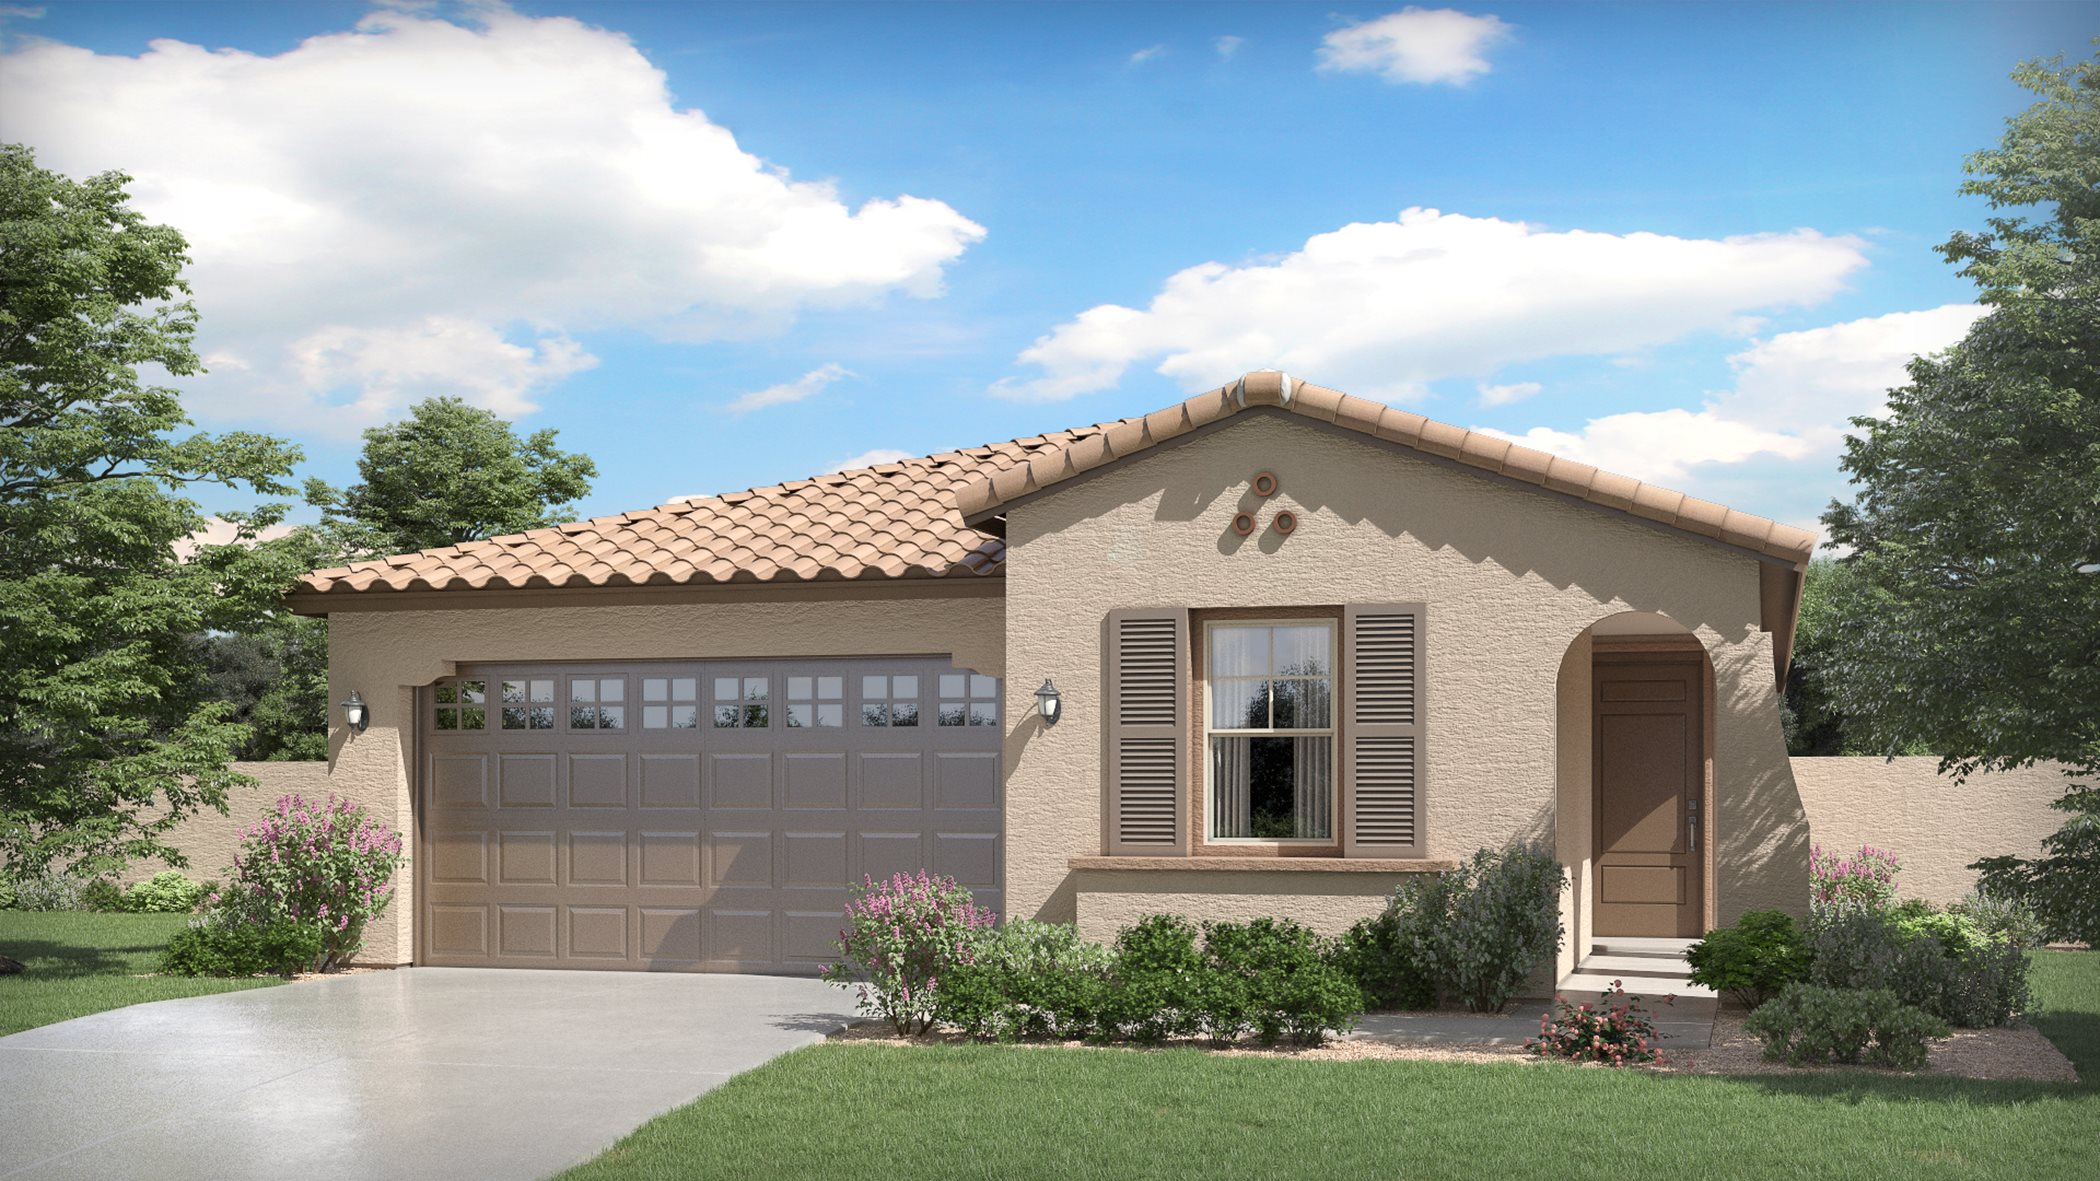 Palo Verde Plan 3519 A Spanish Colonial